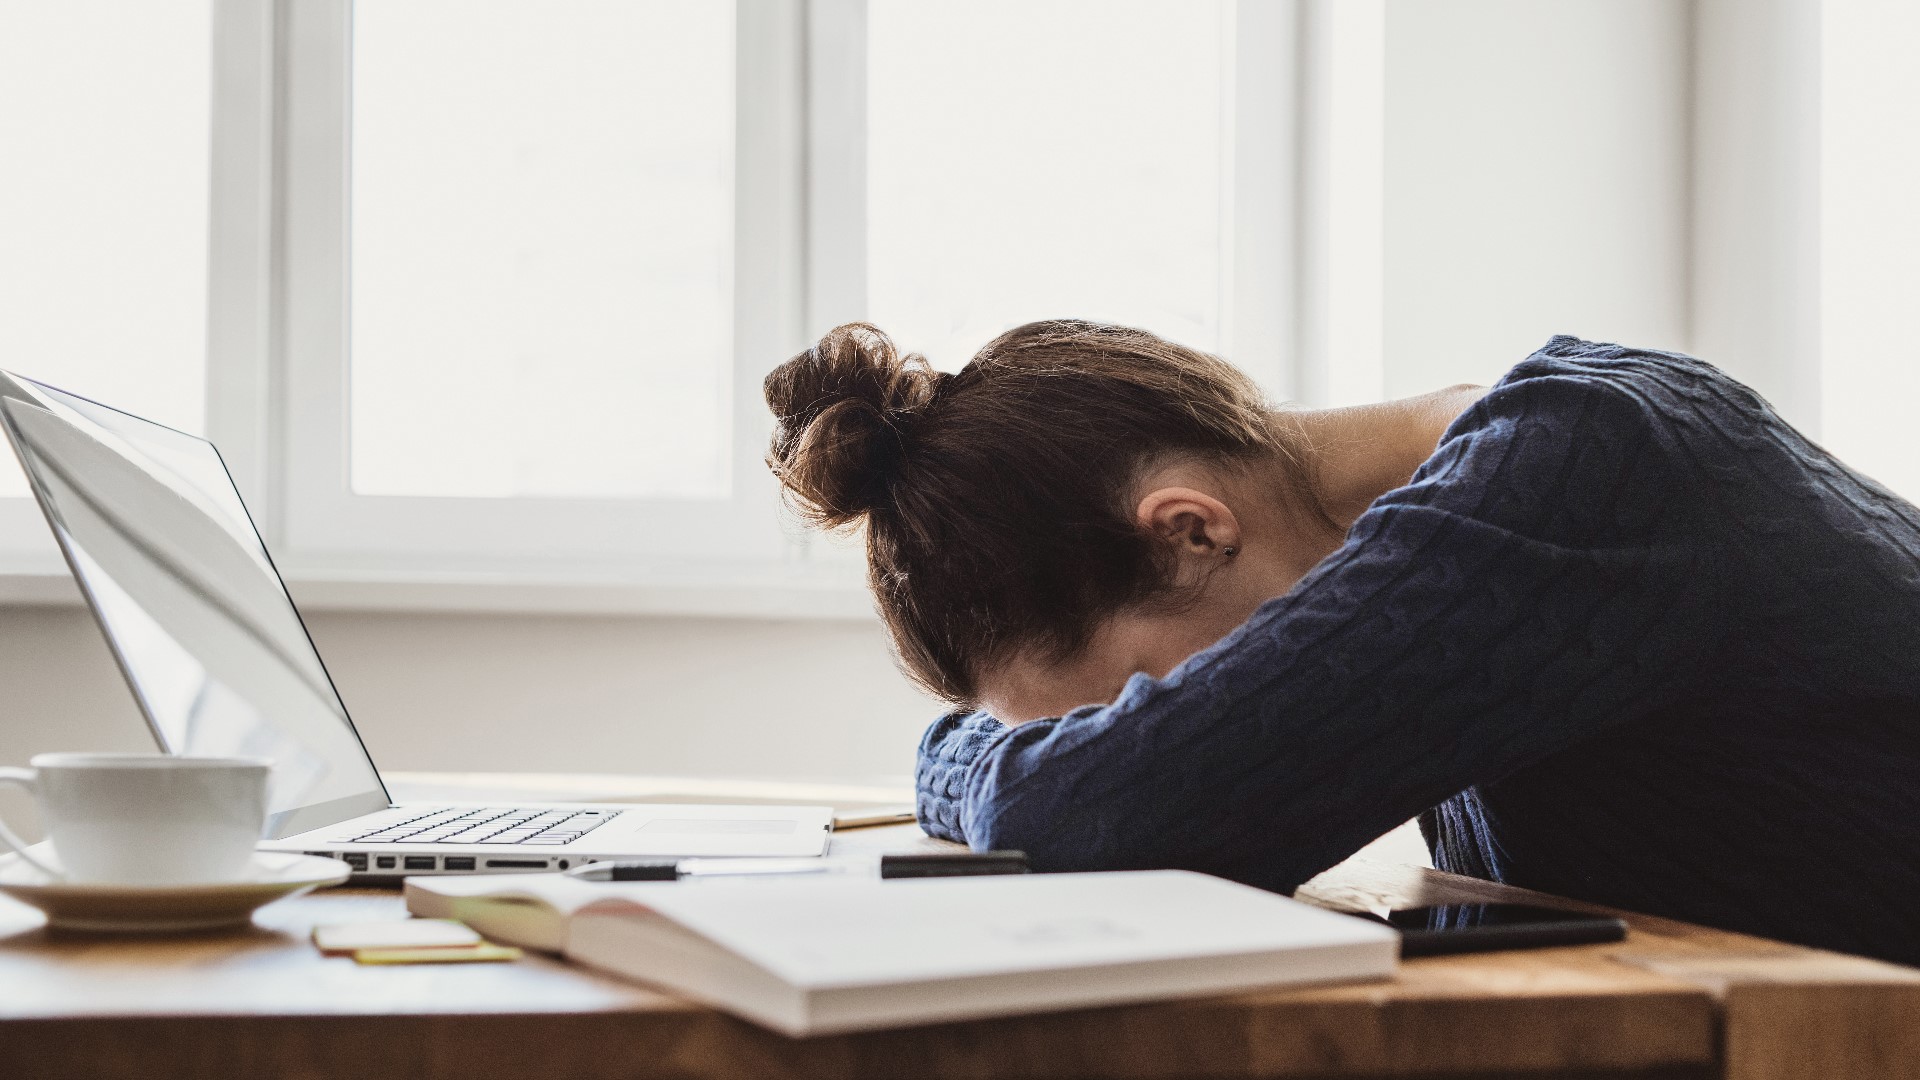 Technology helps counter work-from-home fatigue